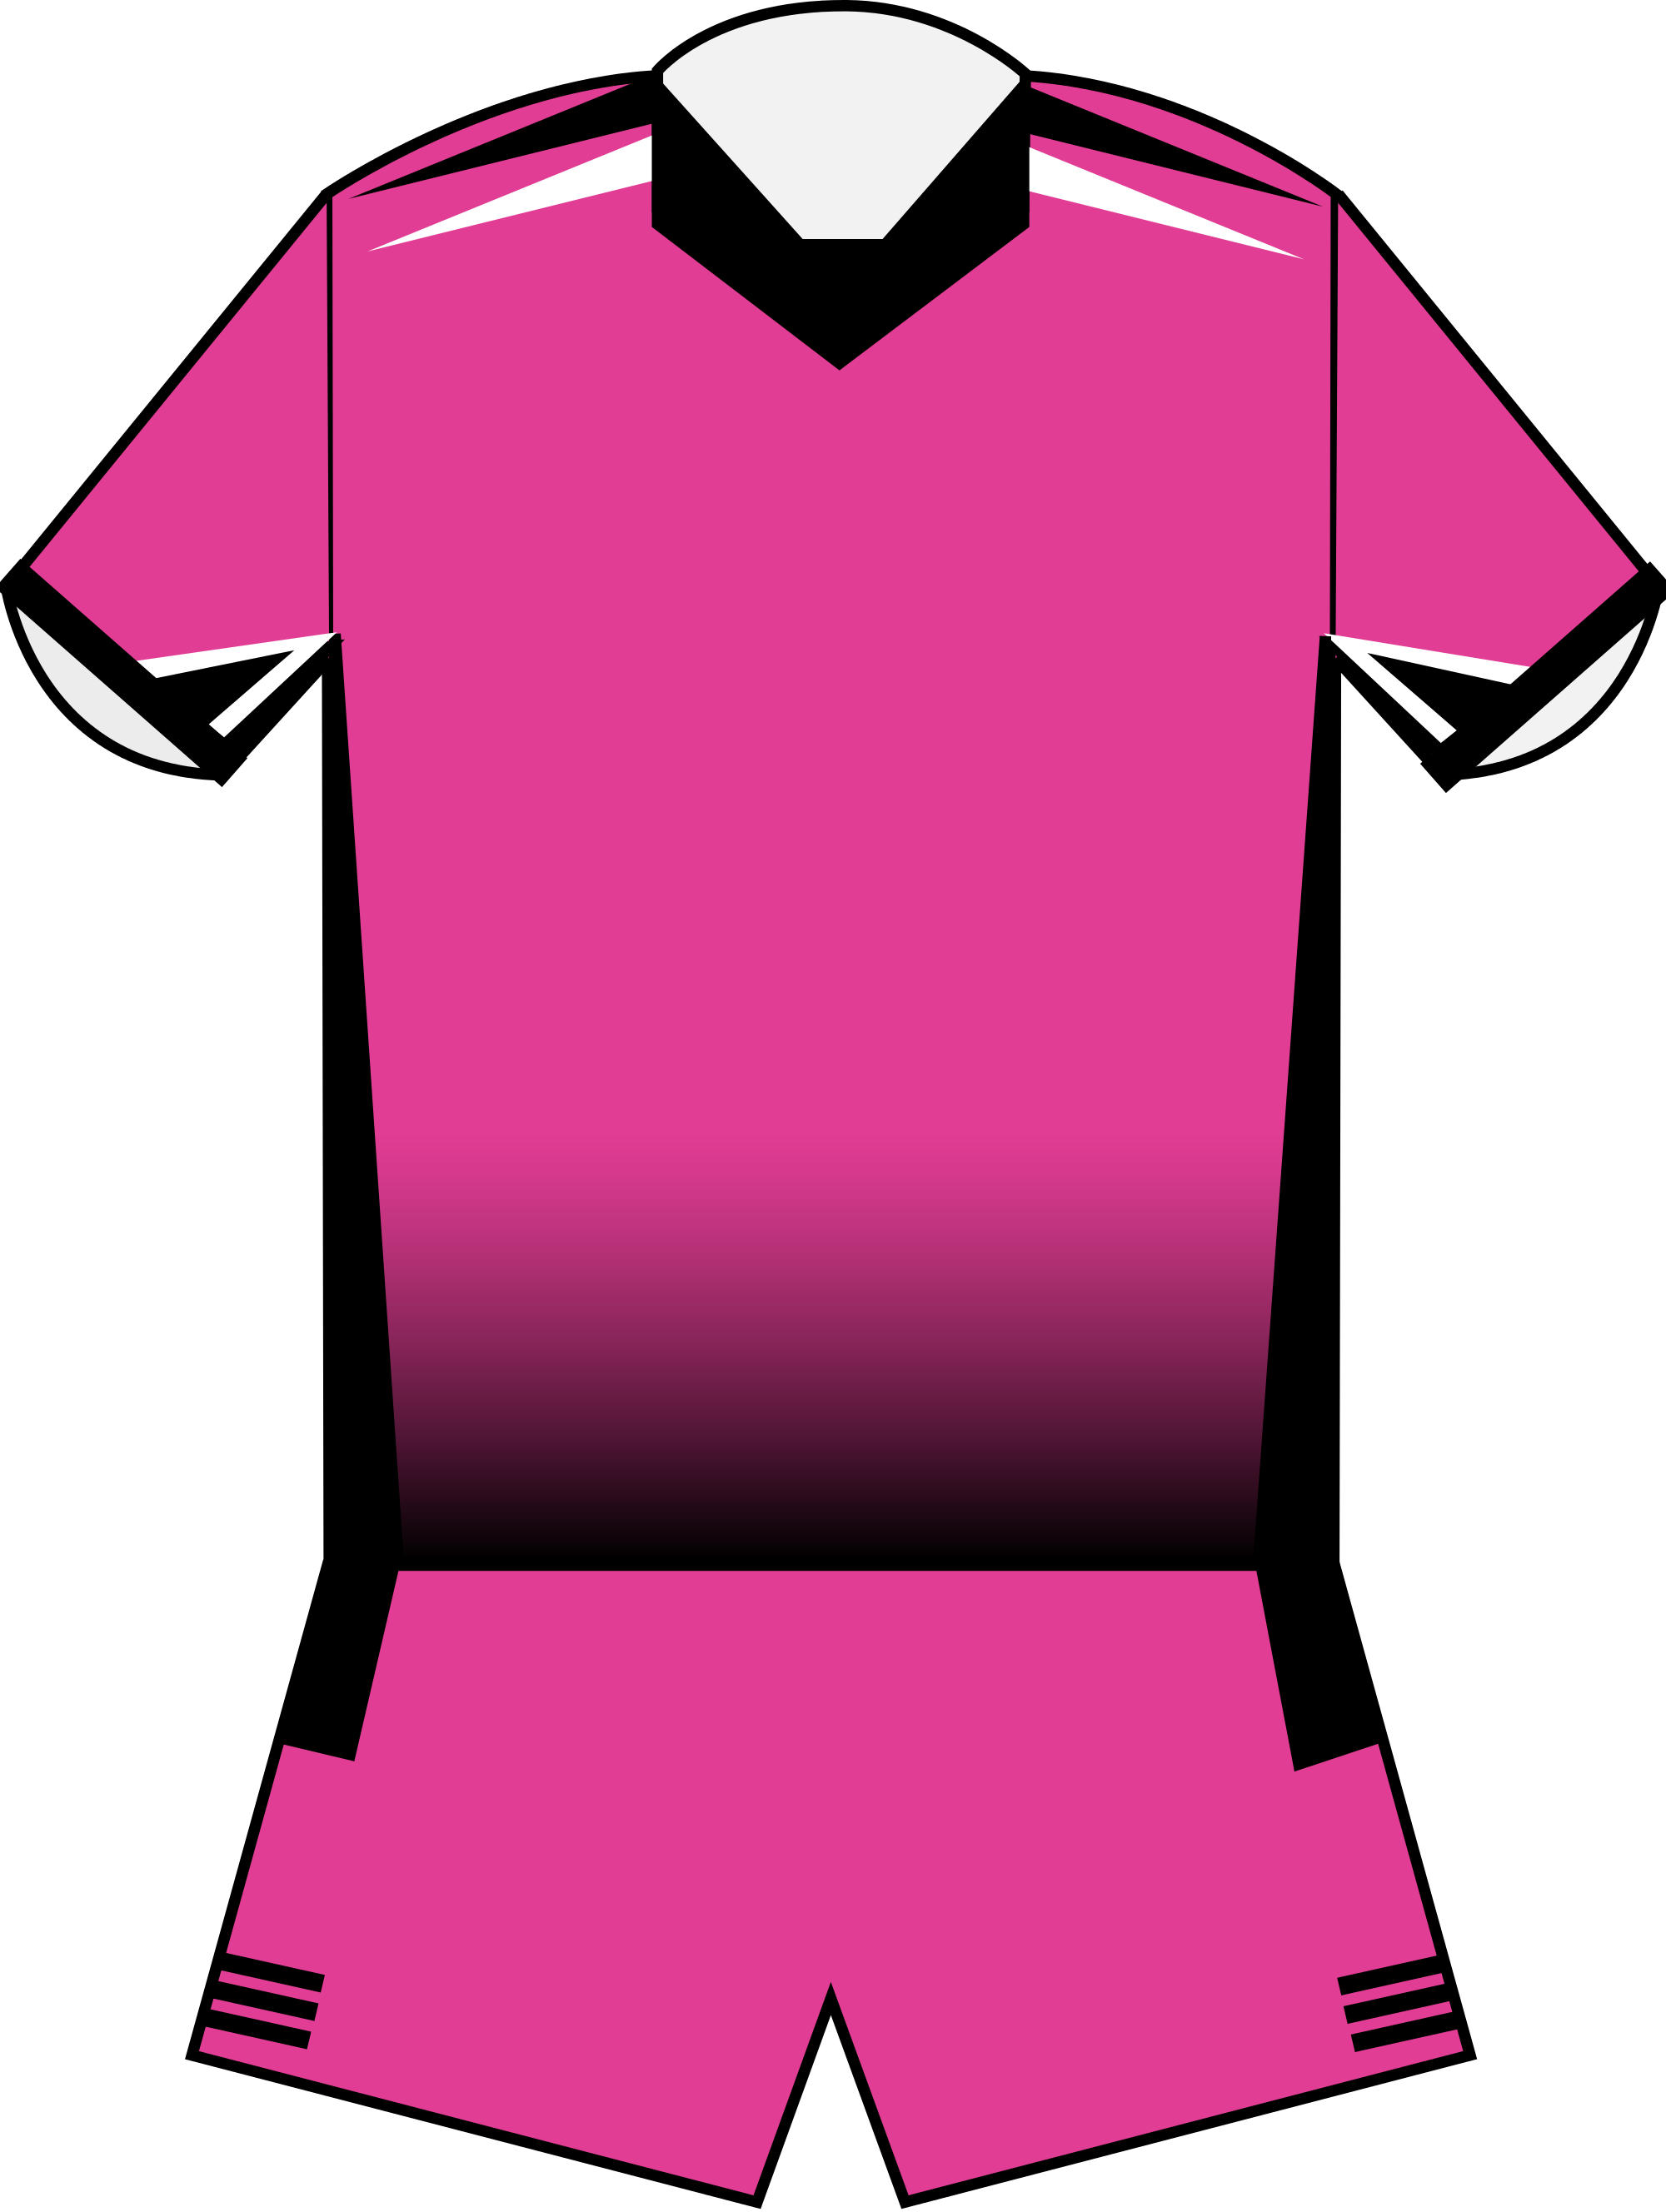 File:2013 Pink Penrith Panthers Jersey.svg